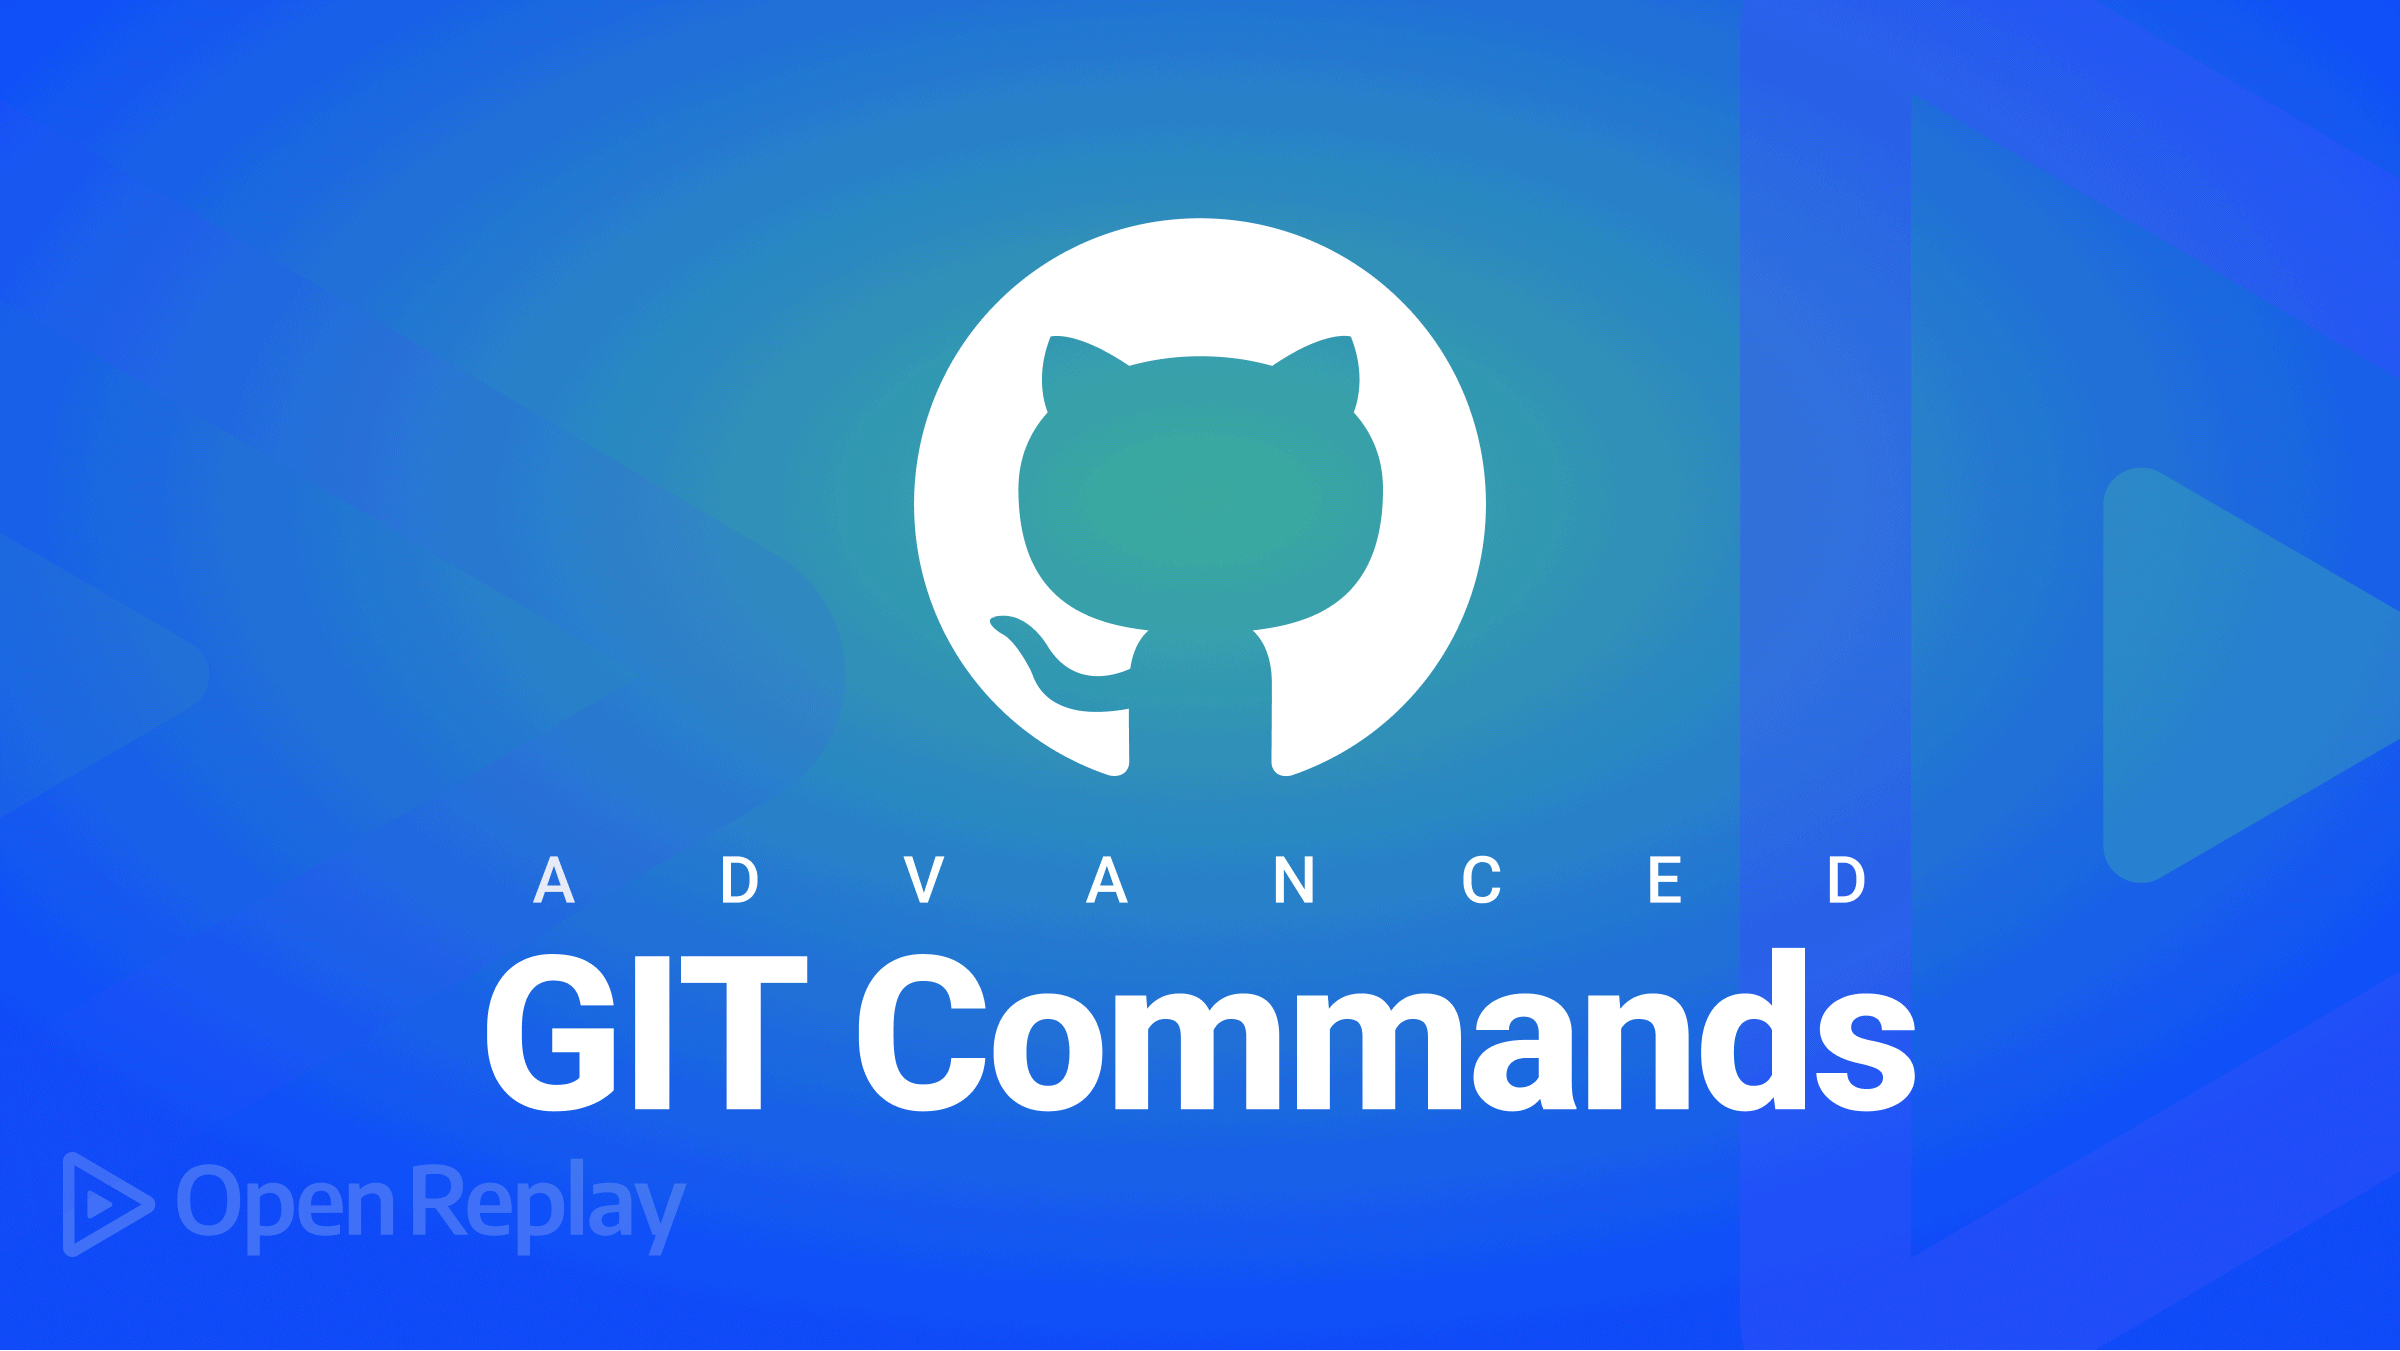 Top 12 Advanced Git Commands to Know